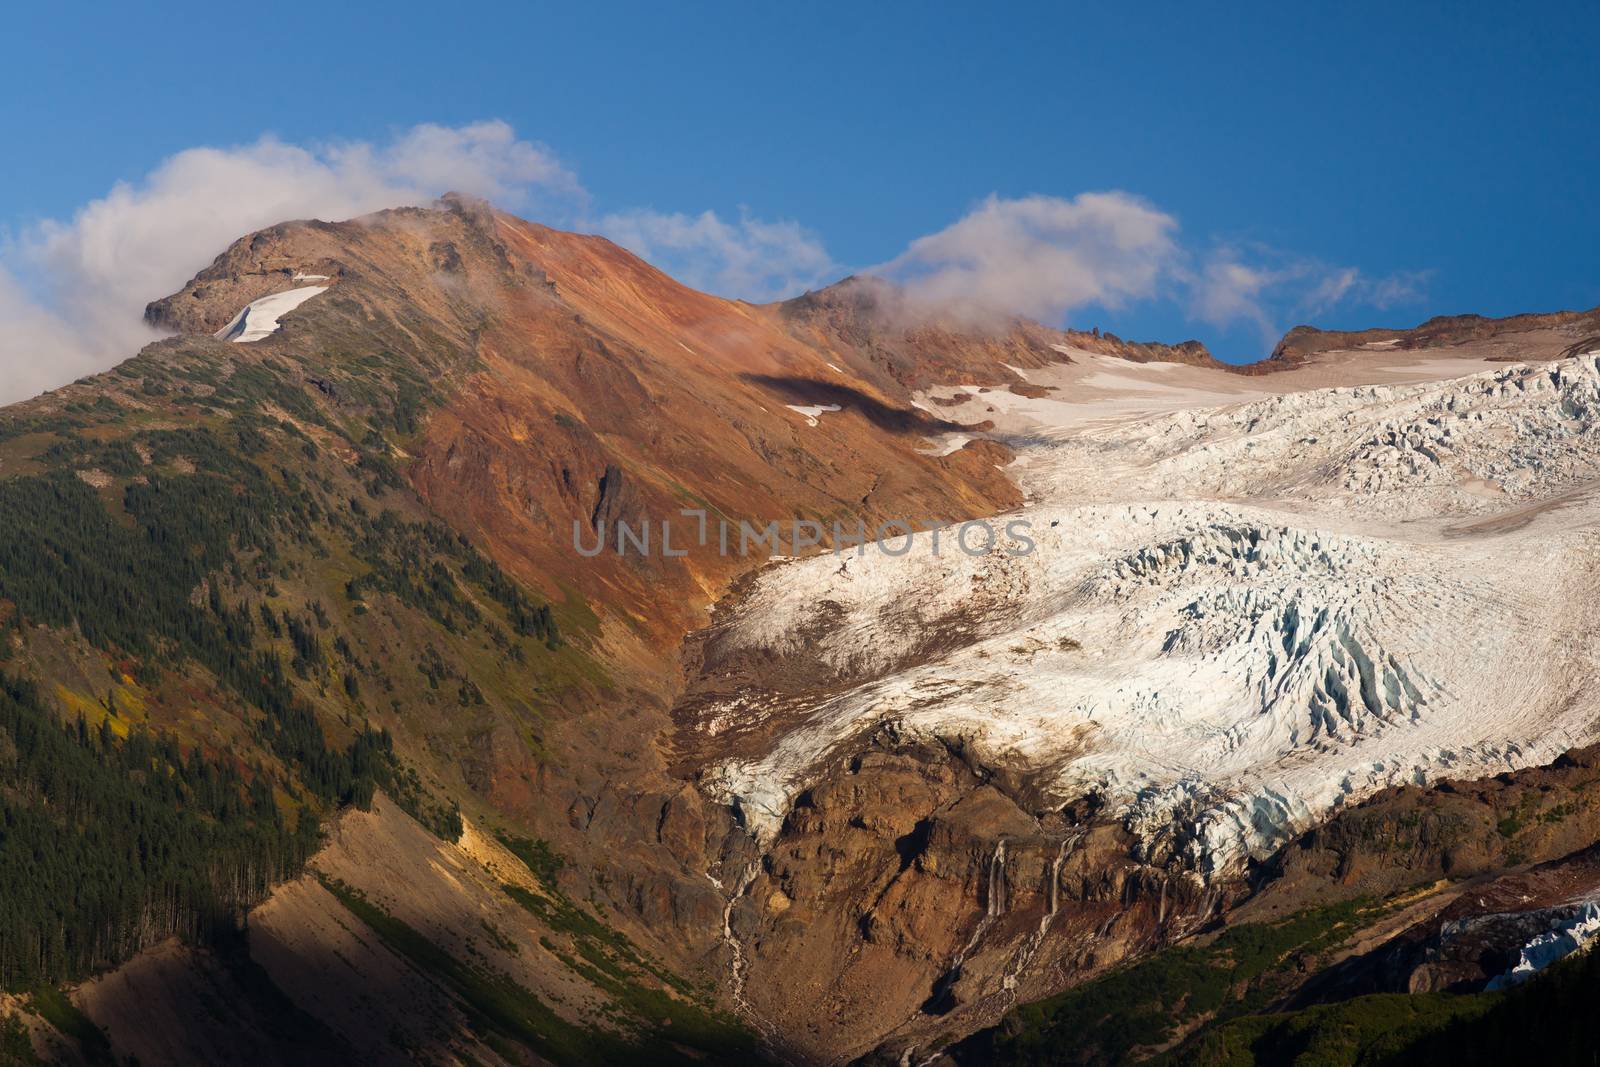 A Glacier on Mt. Baker part of the Cascade Range in the late afternoon just before sunset.